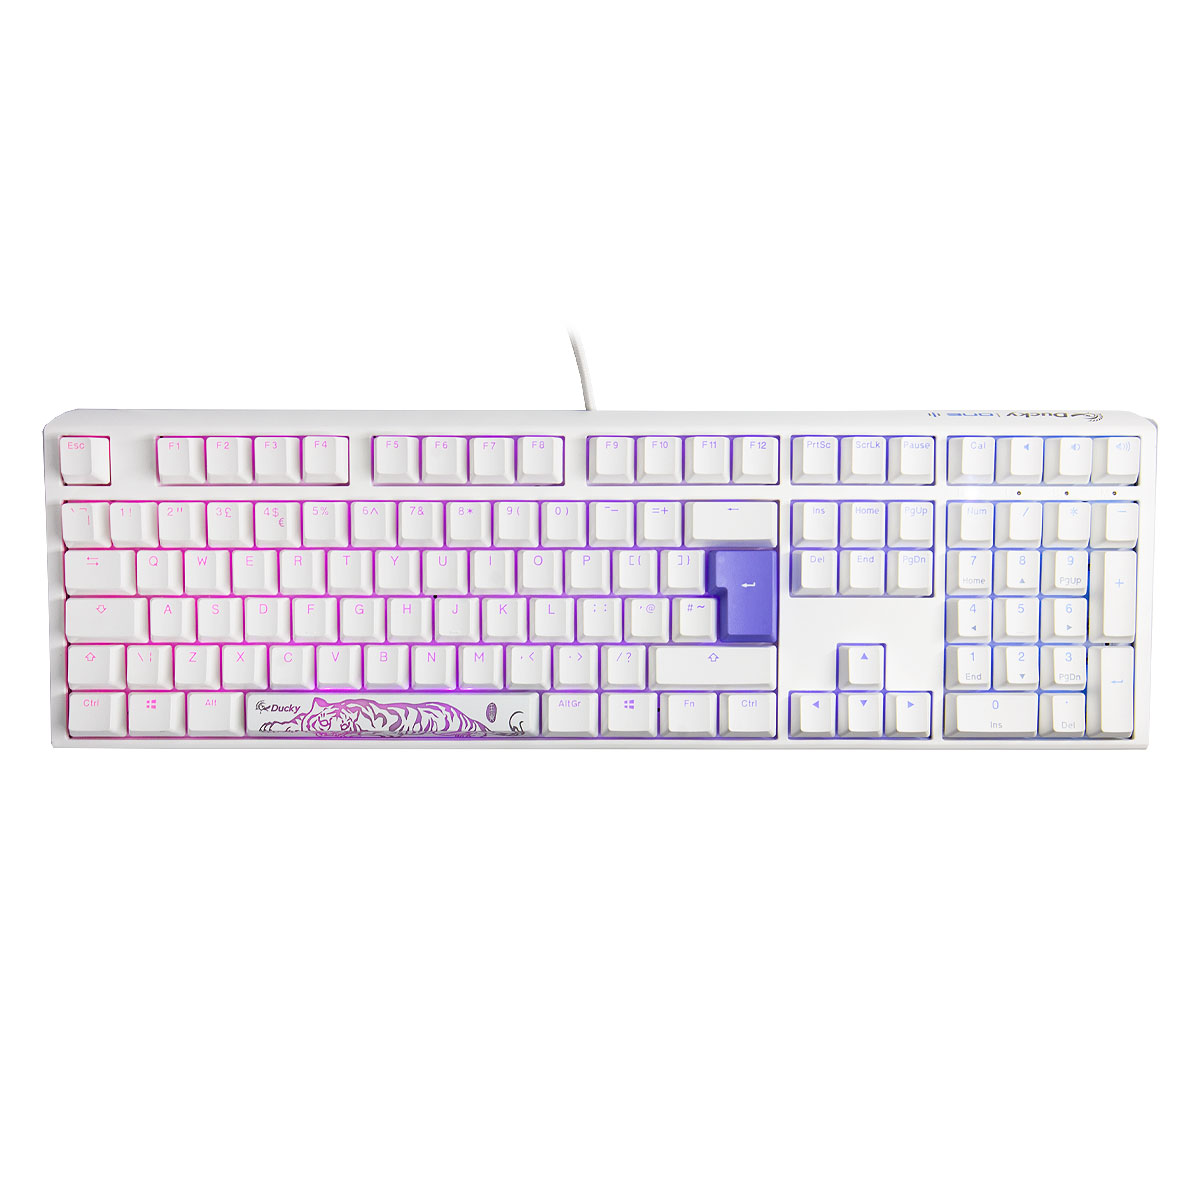 Ducky One 3 Classic Fullsize USB RGB Mechanical Gaming Keyboard Cherry Silent Red - Pure White UK Layout